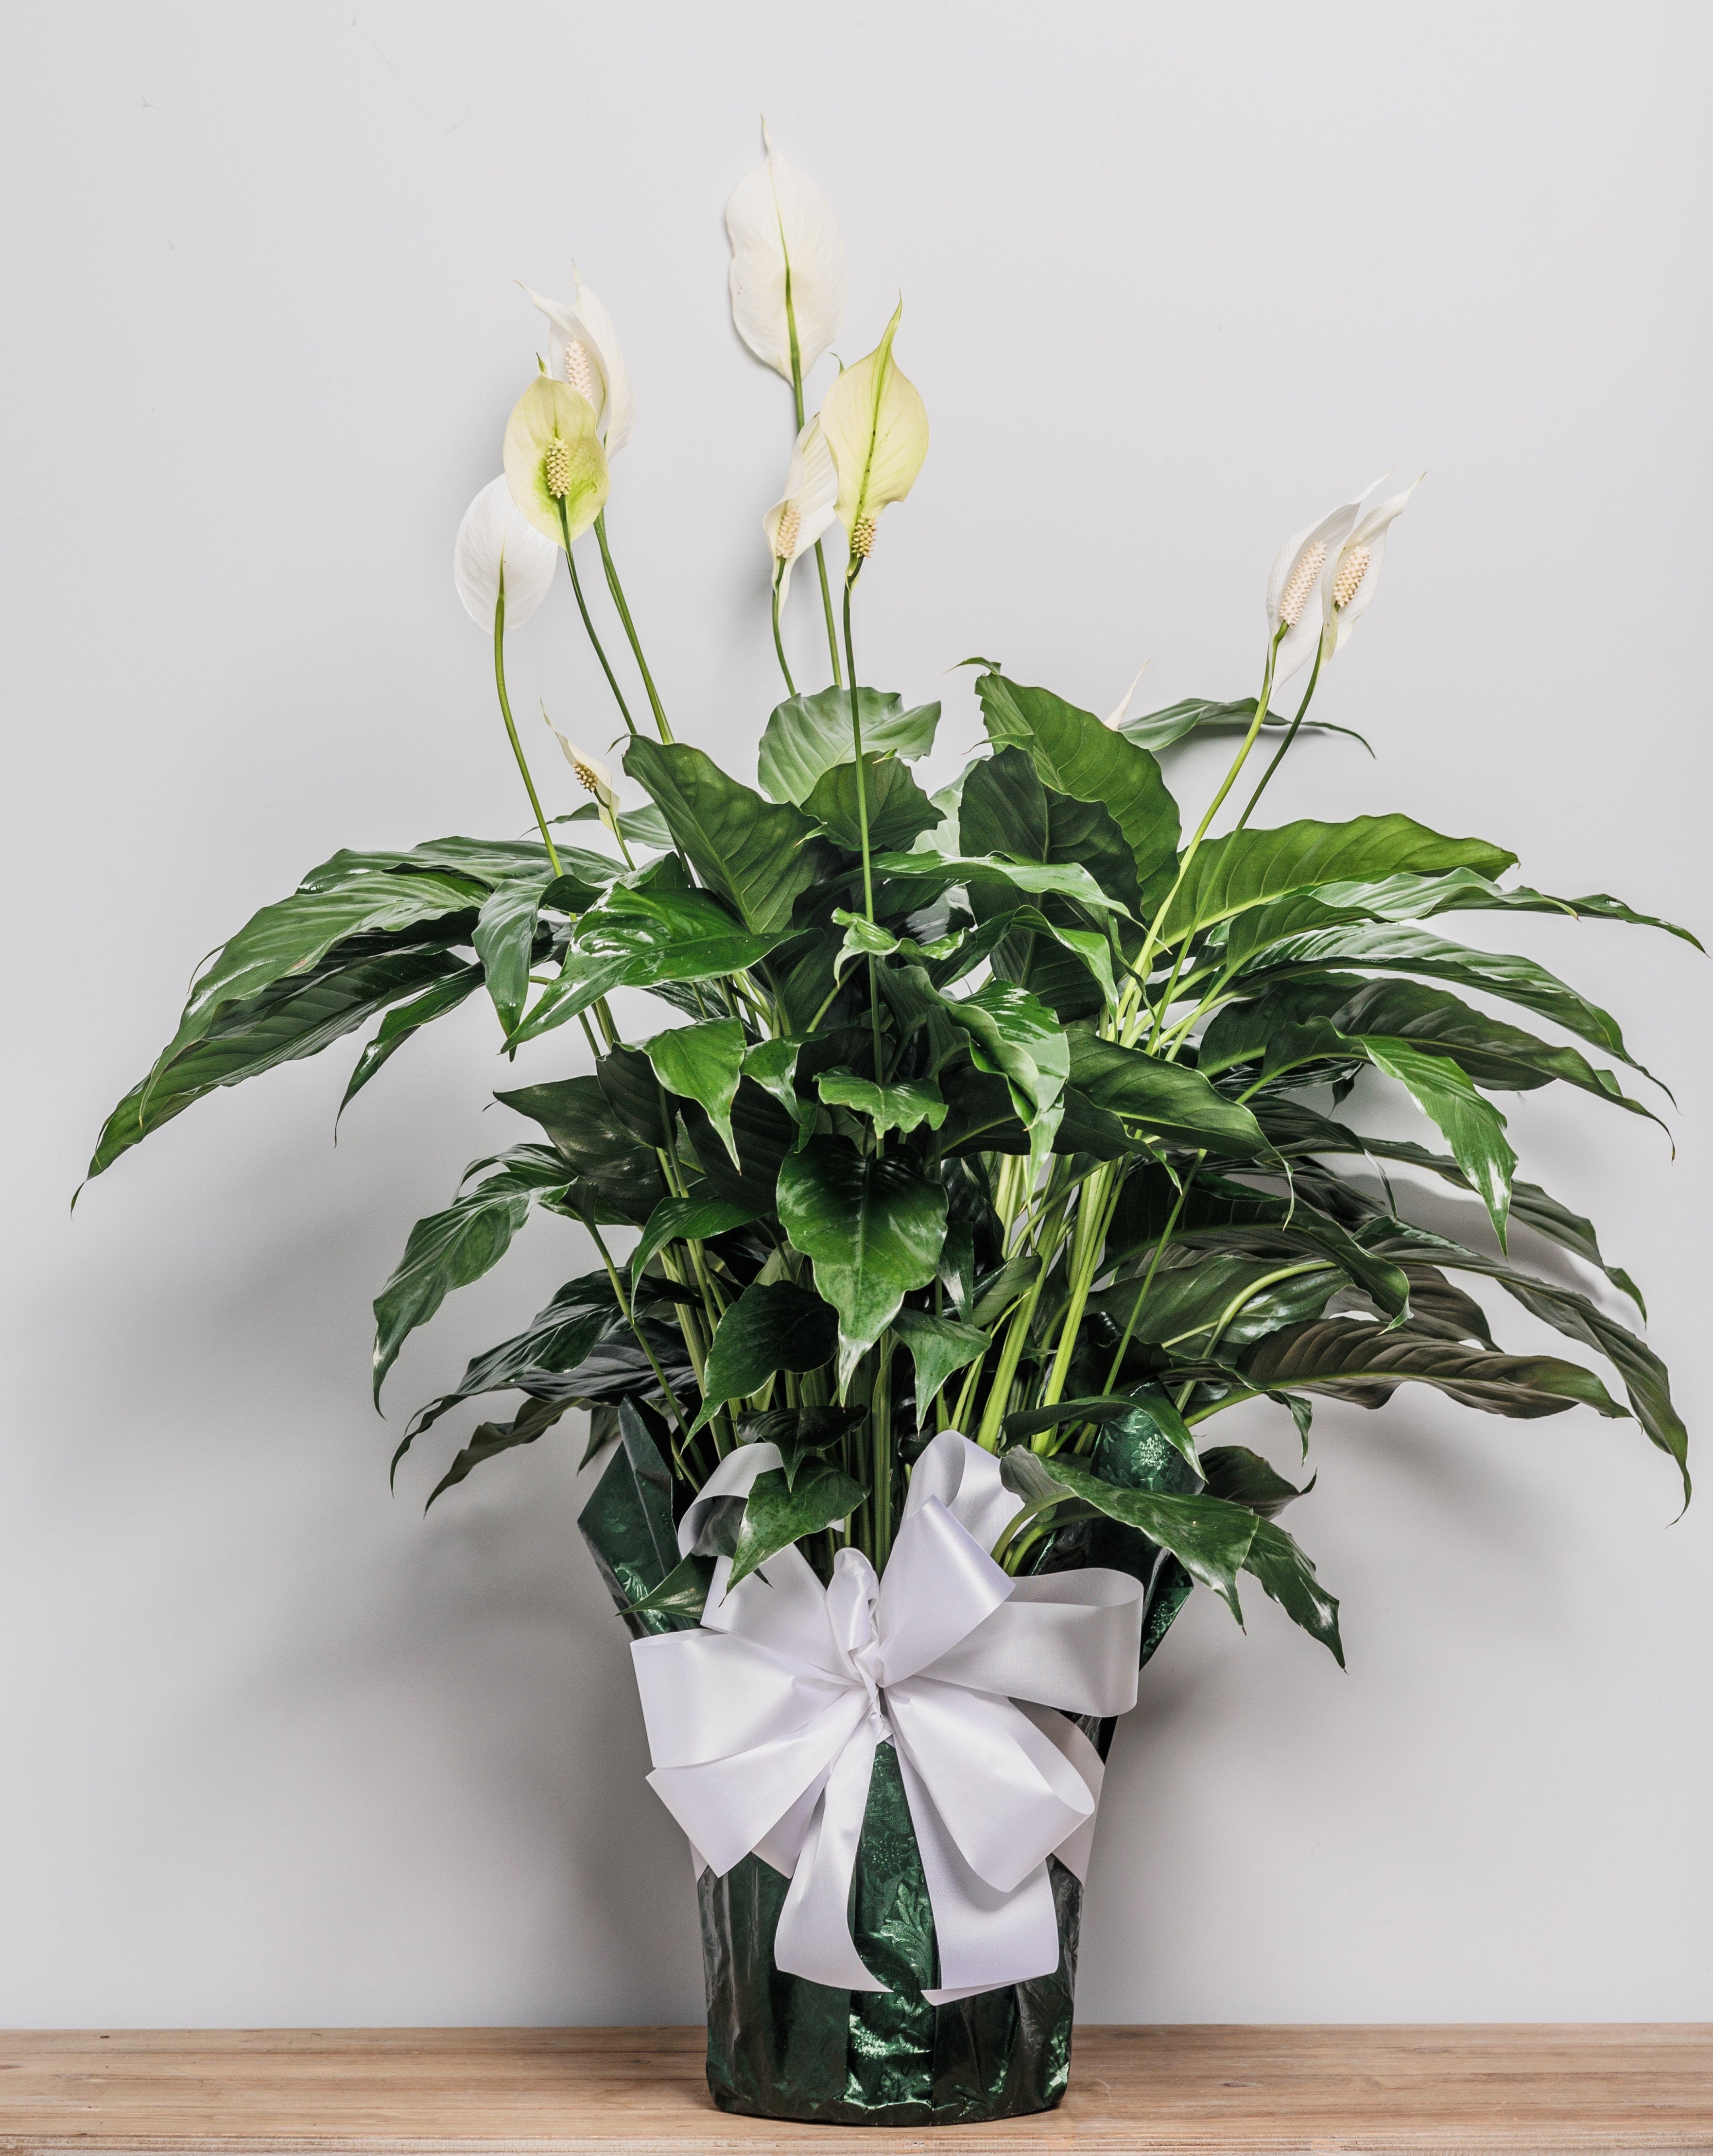 A peace lily plant (spathiphyllum) wrapped in foil with a bow.